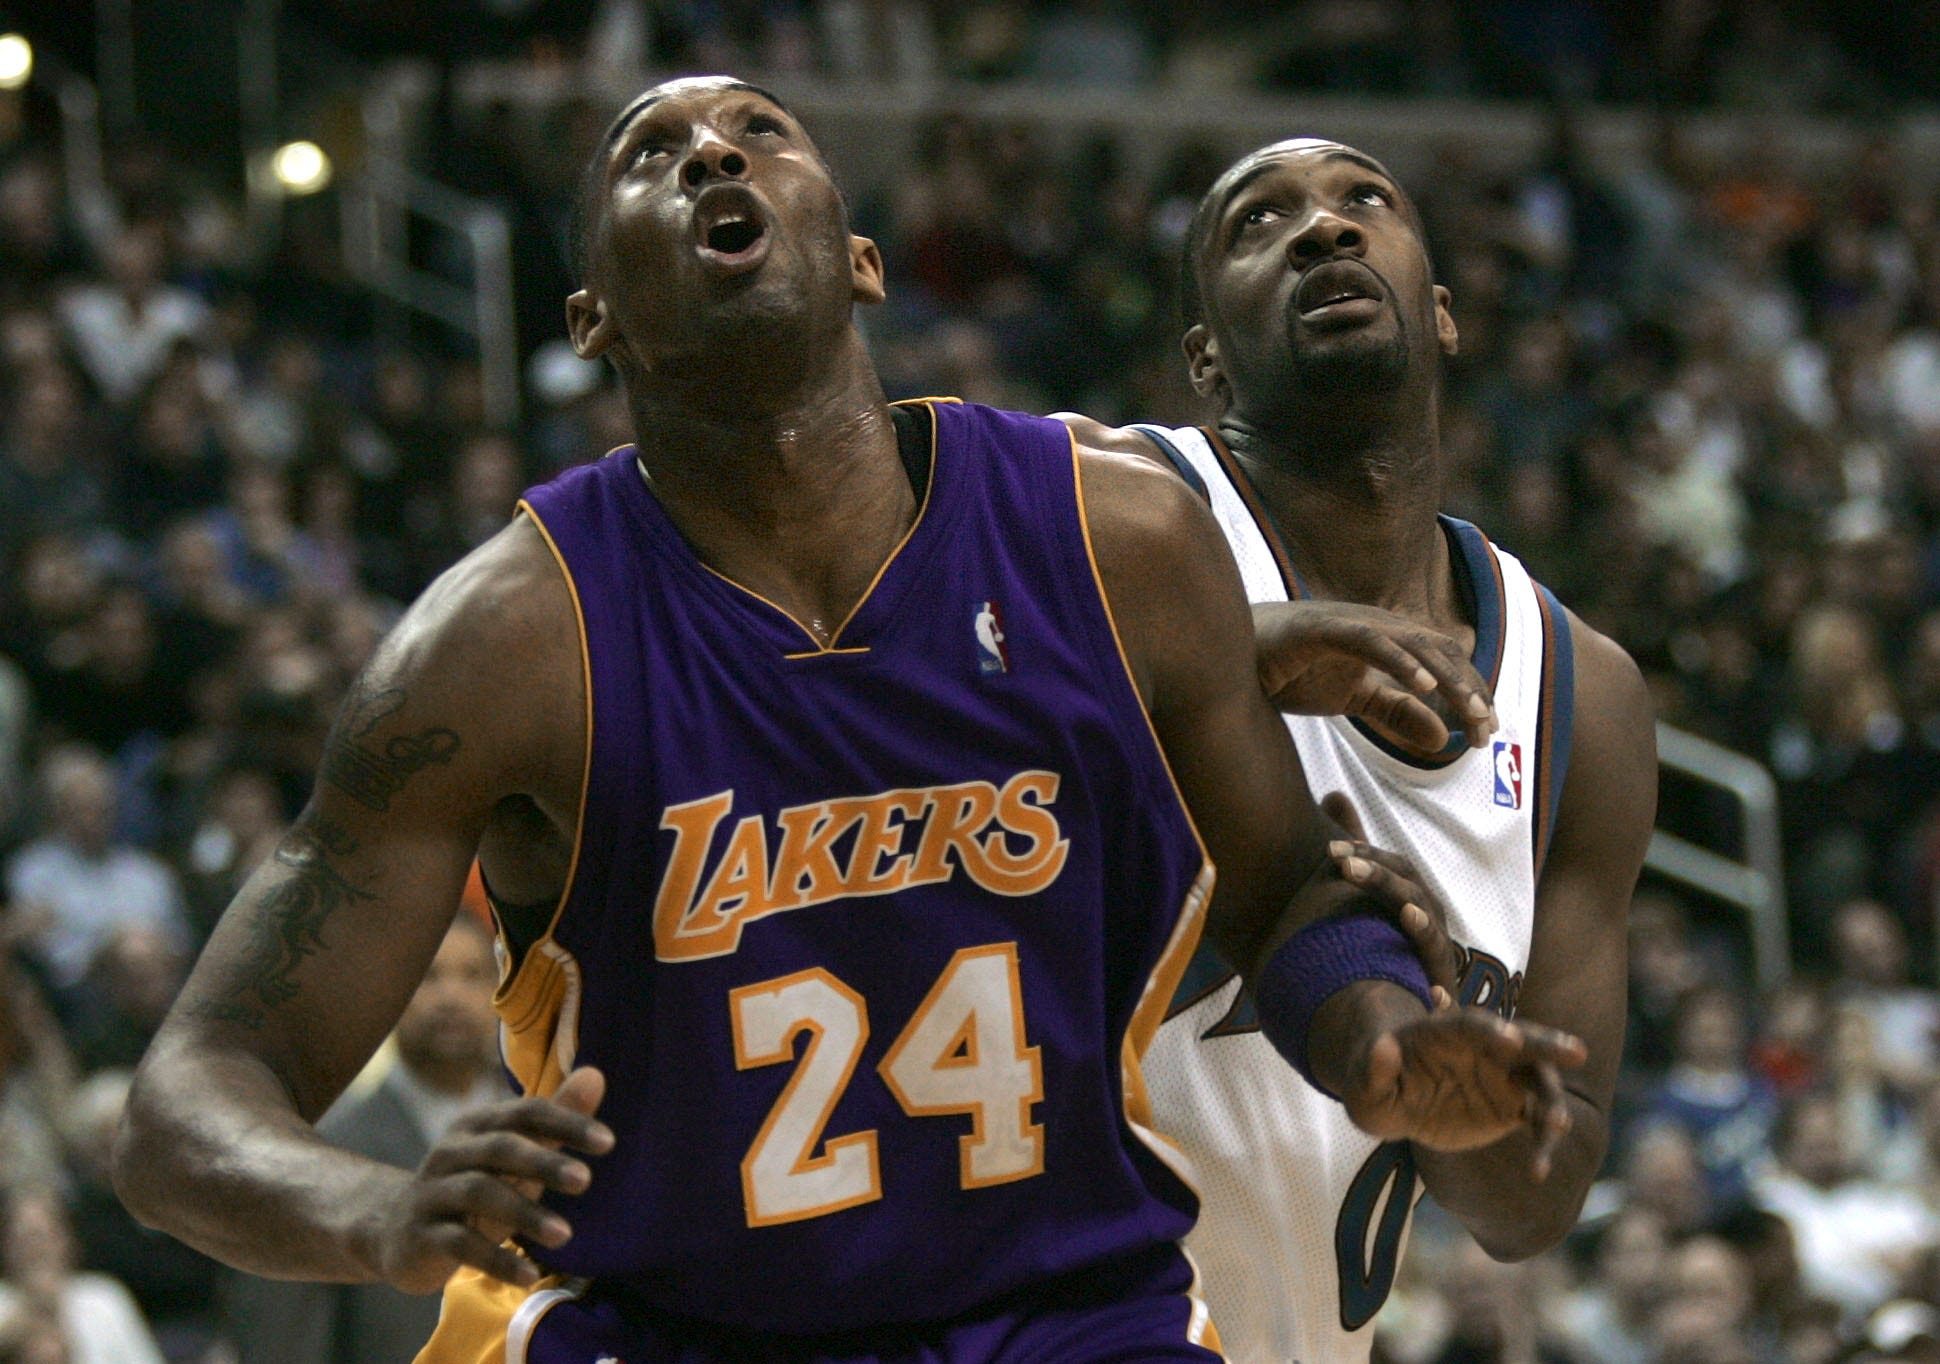 Washington's Gilbert Arenas, right, and Kobe Bryant look for a rebound during the fourth quarter of a game in 2007.